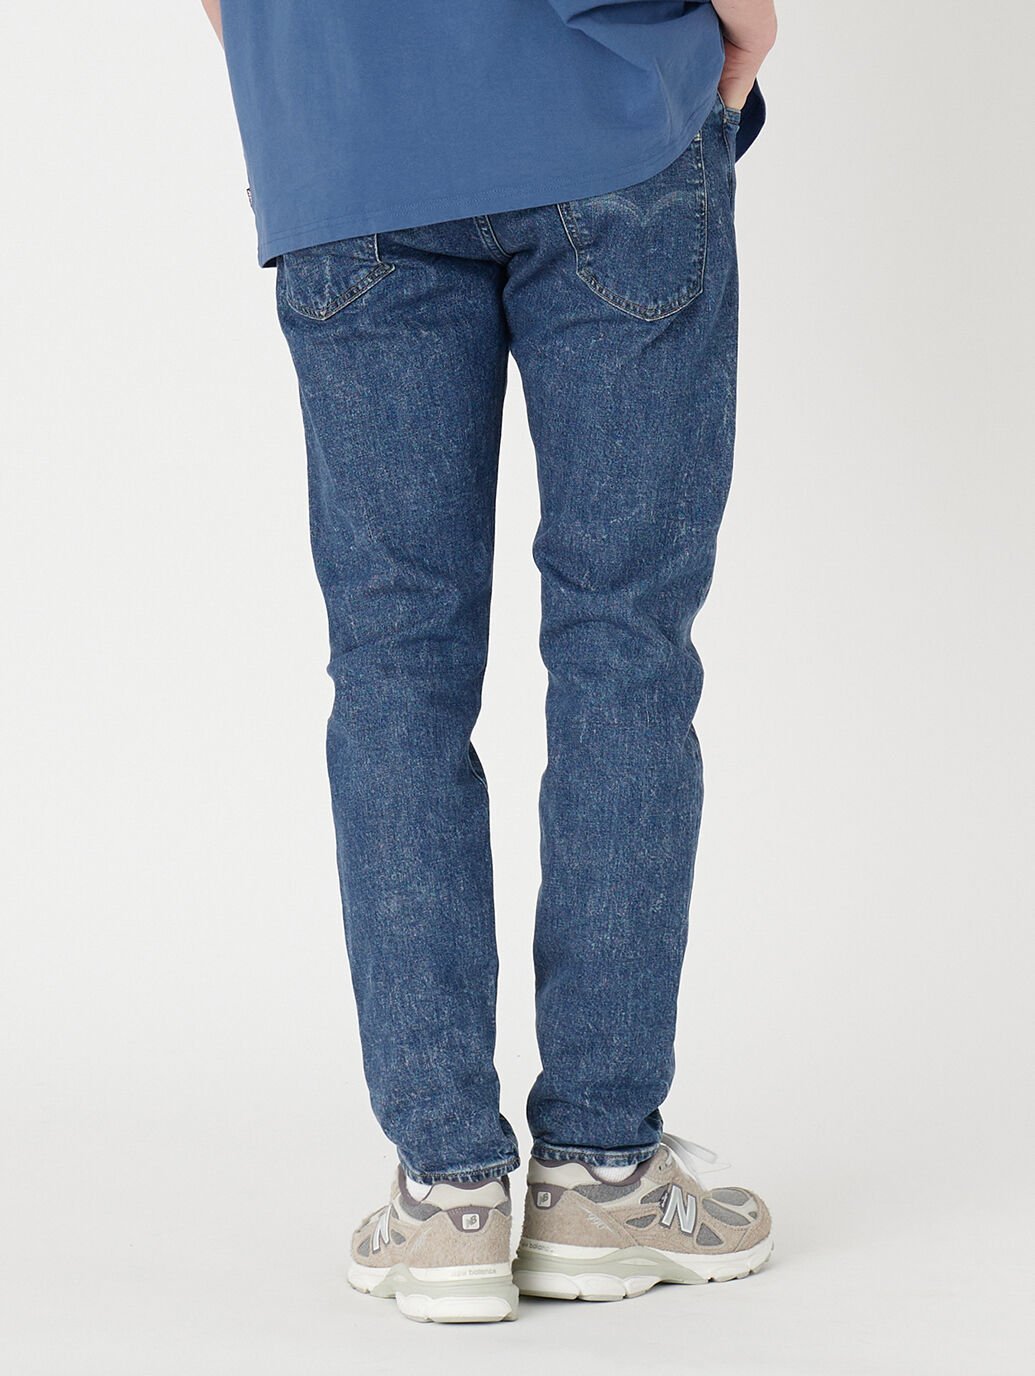 Levi's｜LEVI'S(R) MADE&CRAFTED(R) 512TM スリムテーパードジーンズ